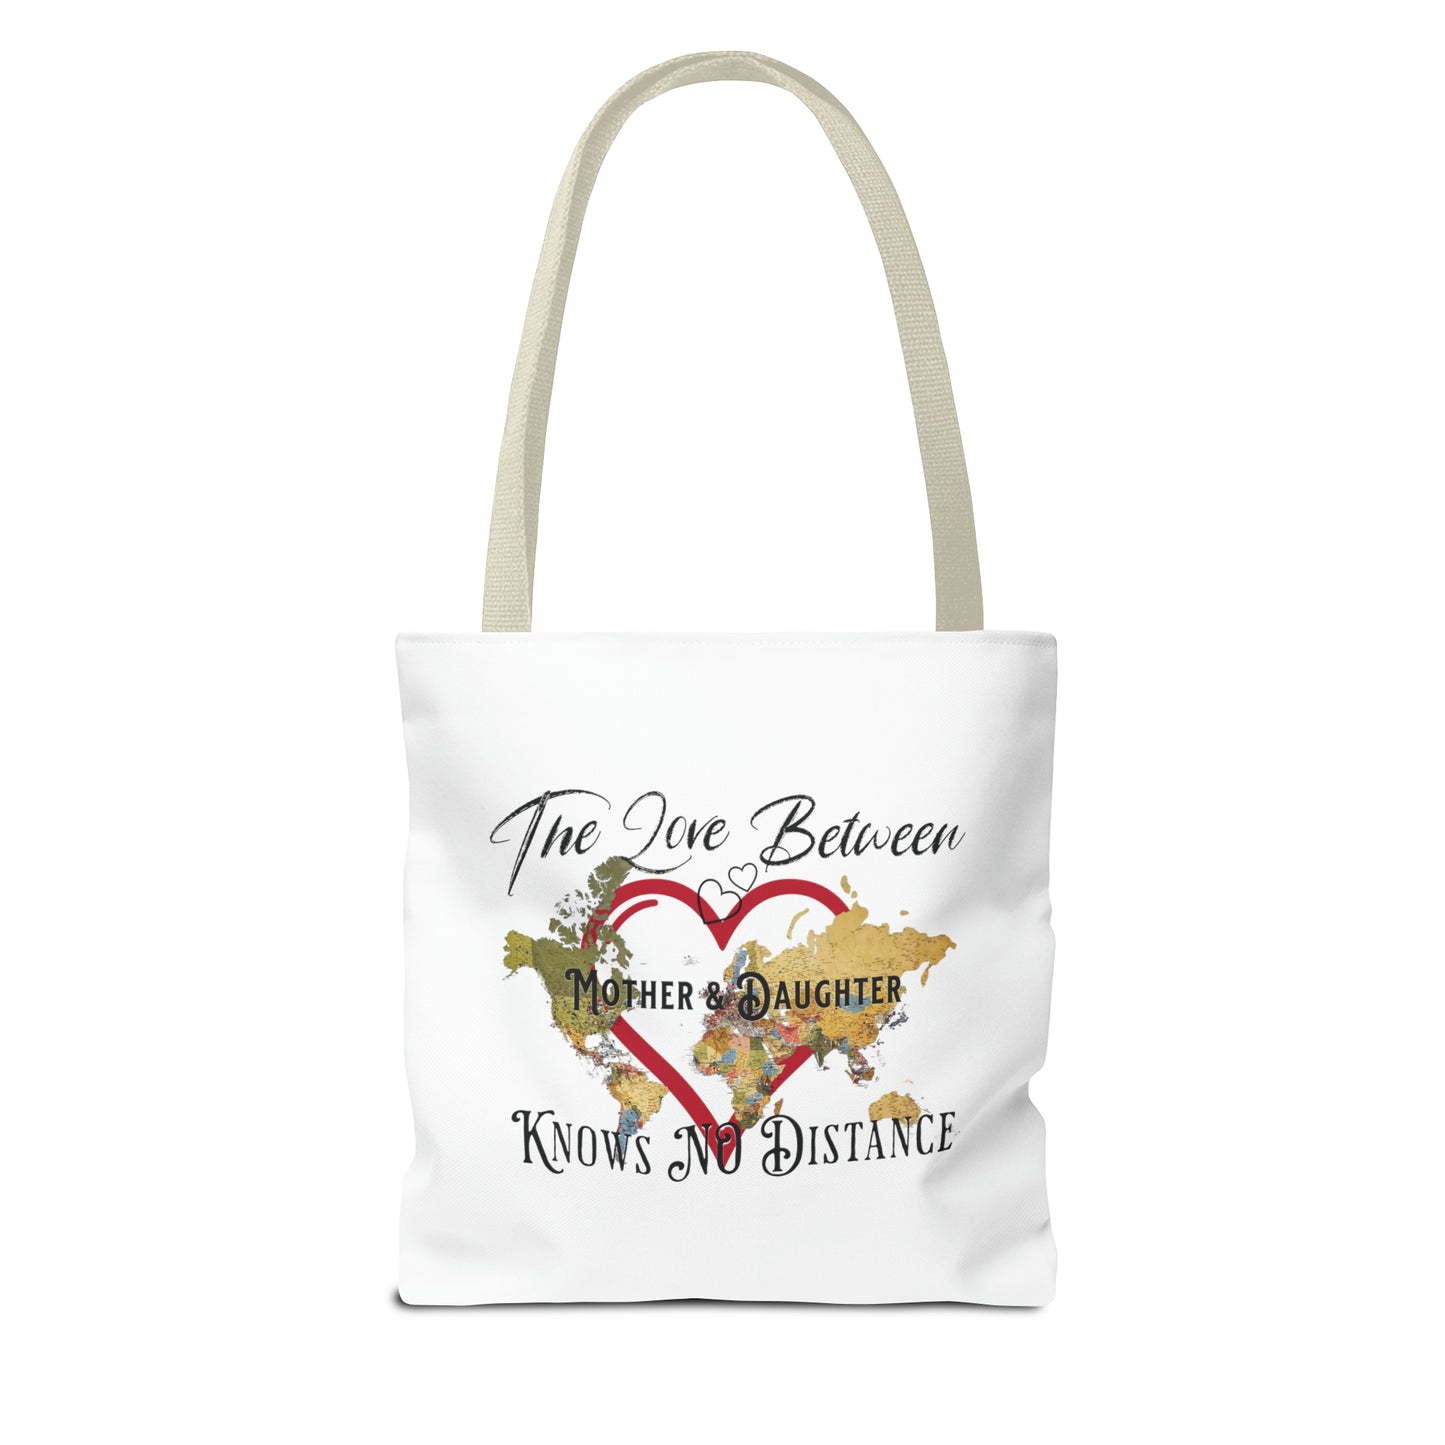 The love between mother and daughter knows no distance - Tote Bag (AOP)